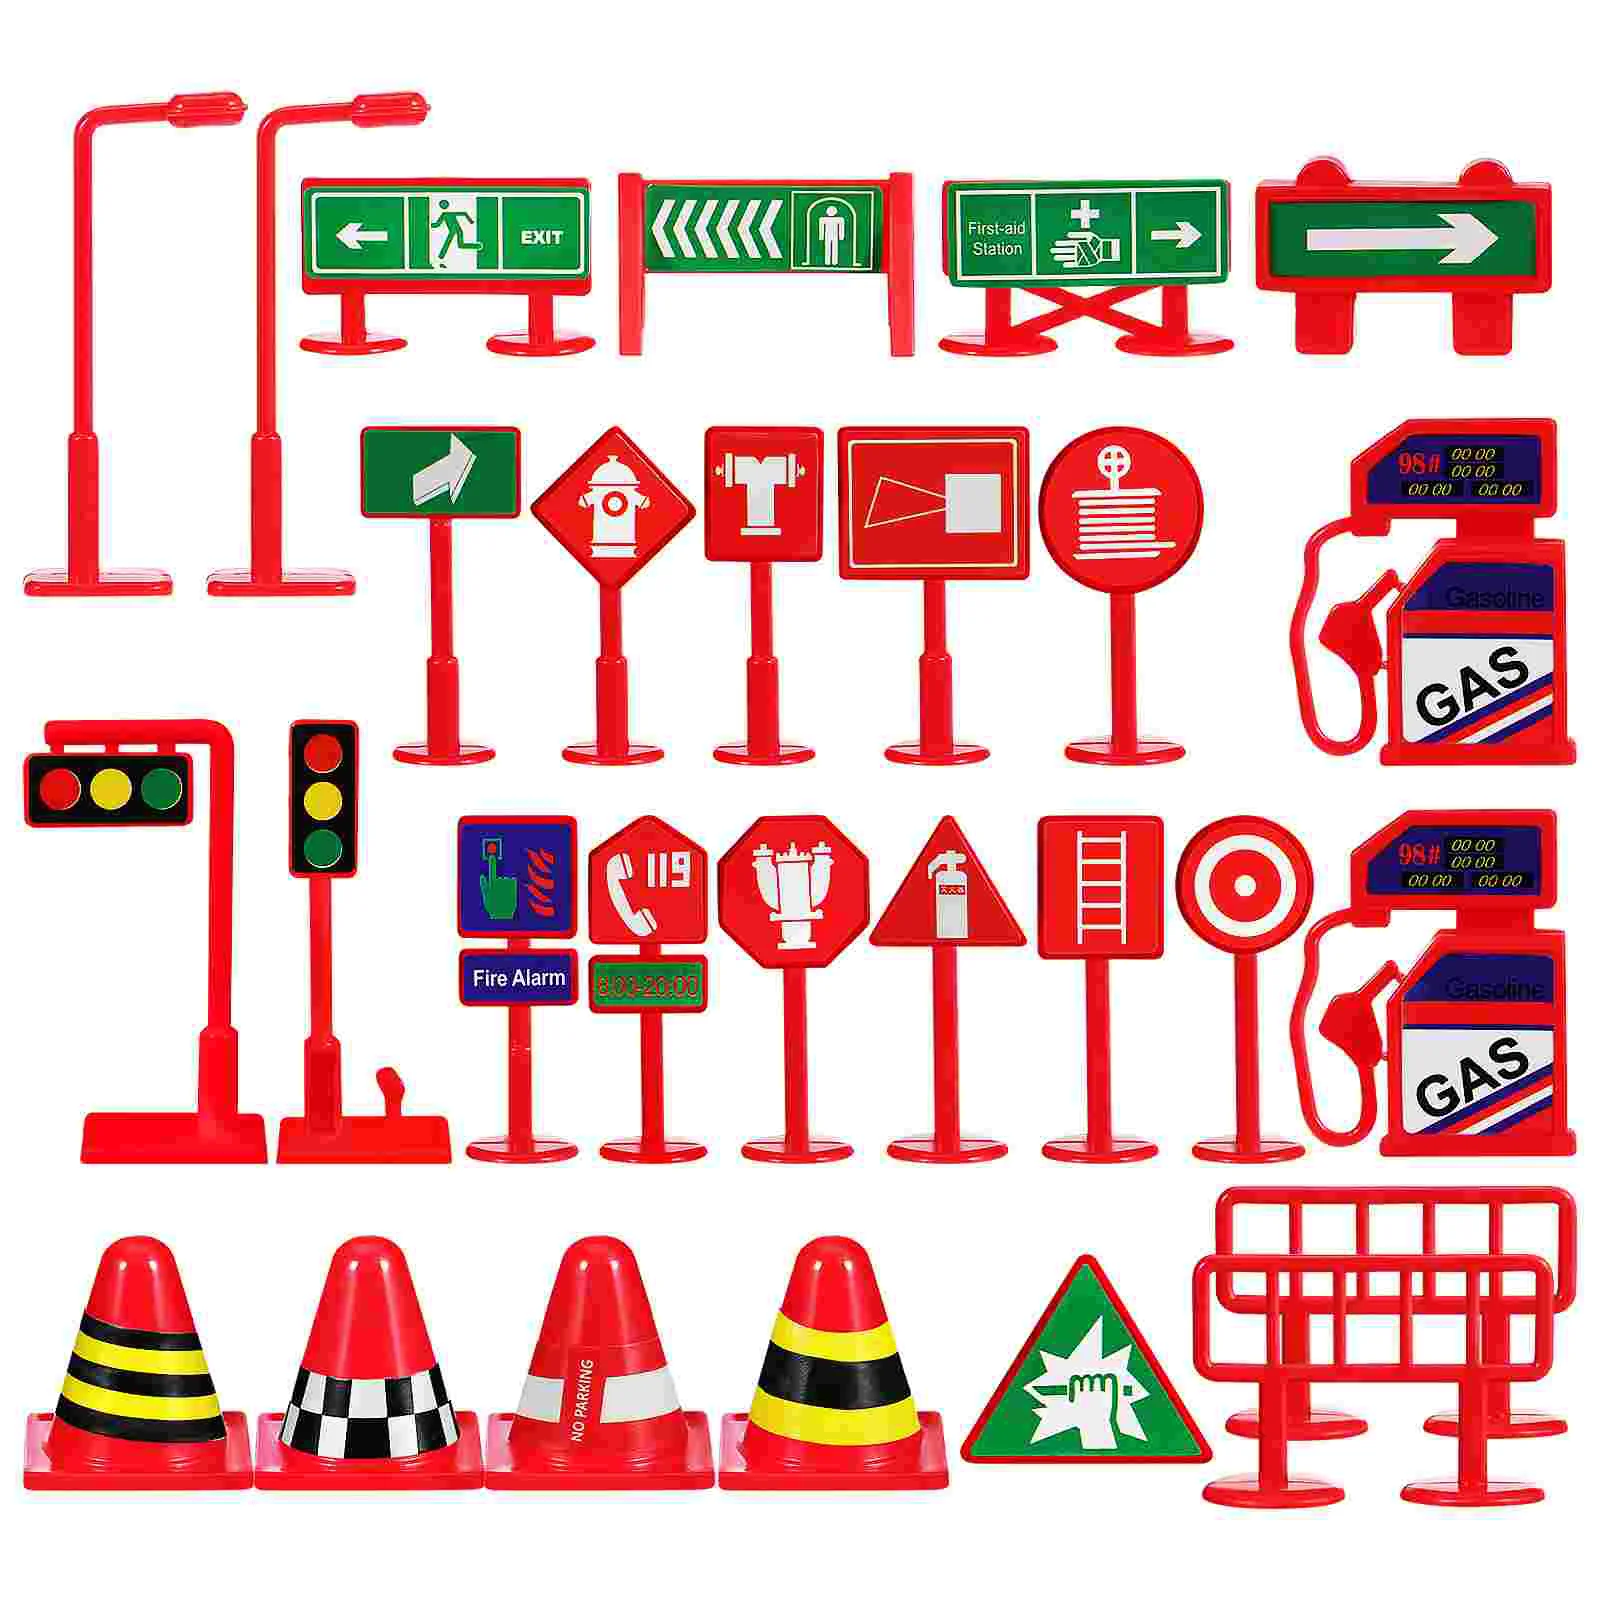 28 Pcs Street Sign Toy Early Education Toys Mini Traffic Cones Kids For Light Lamp Indicator Cognition Signs toy traffic toys for kids sound light mini cones sign models plastic signs signal plaything child